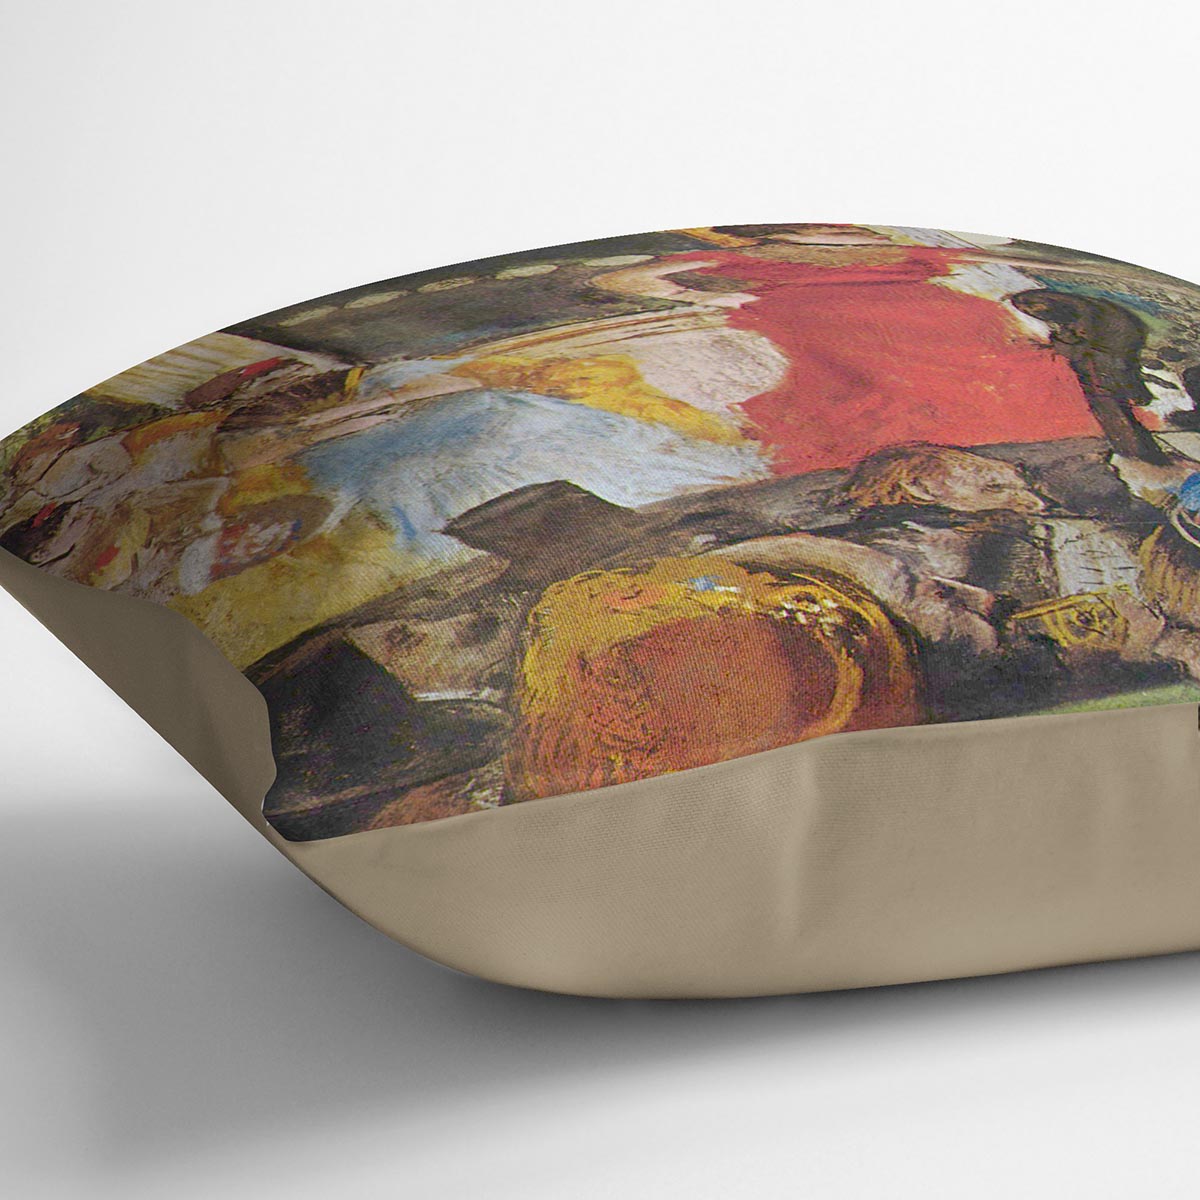 In concert cafe Les Ambassadeurs by Degas Cushion